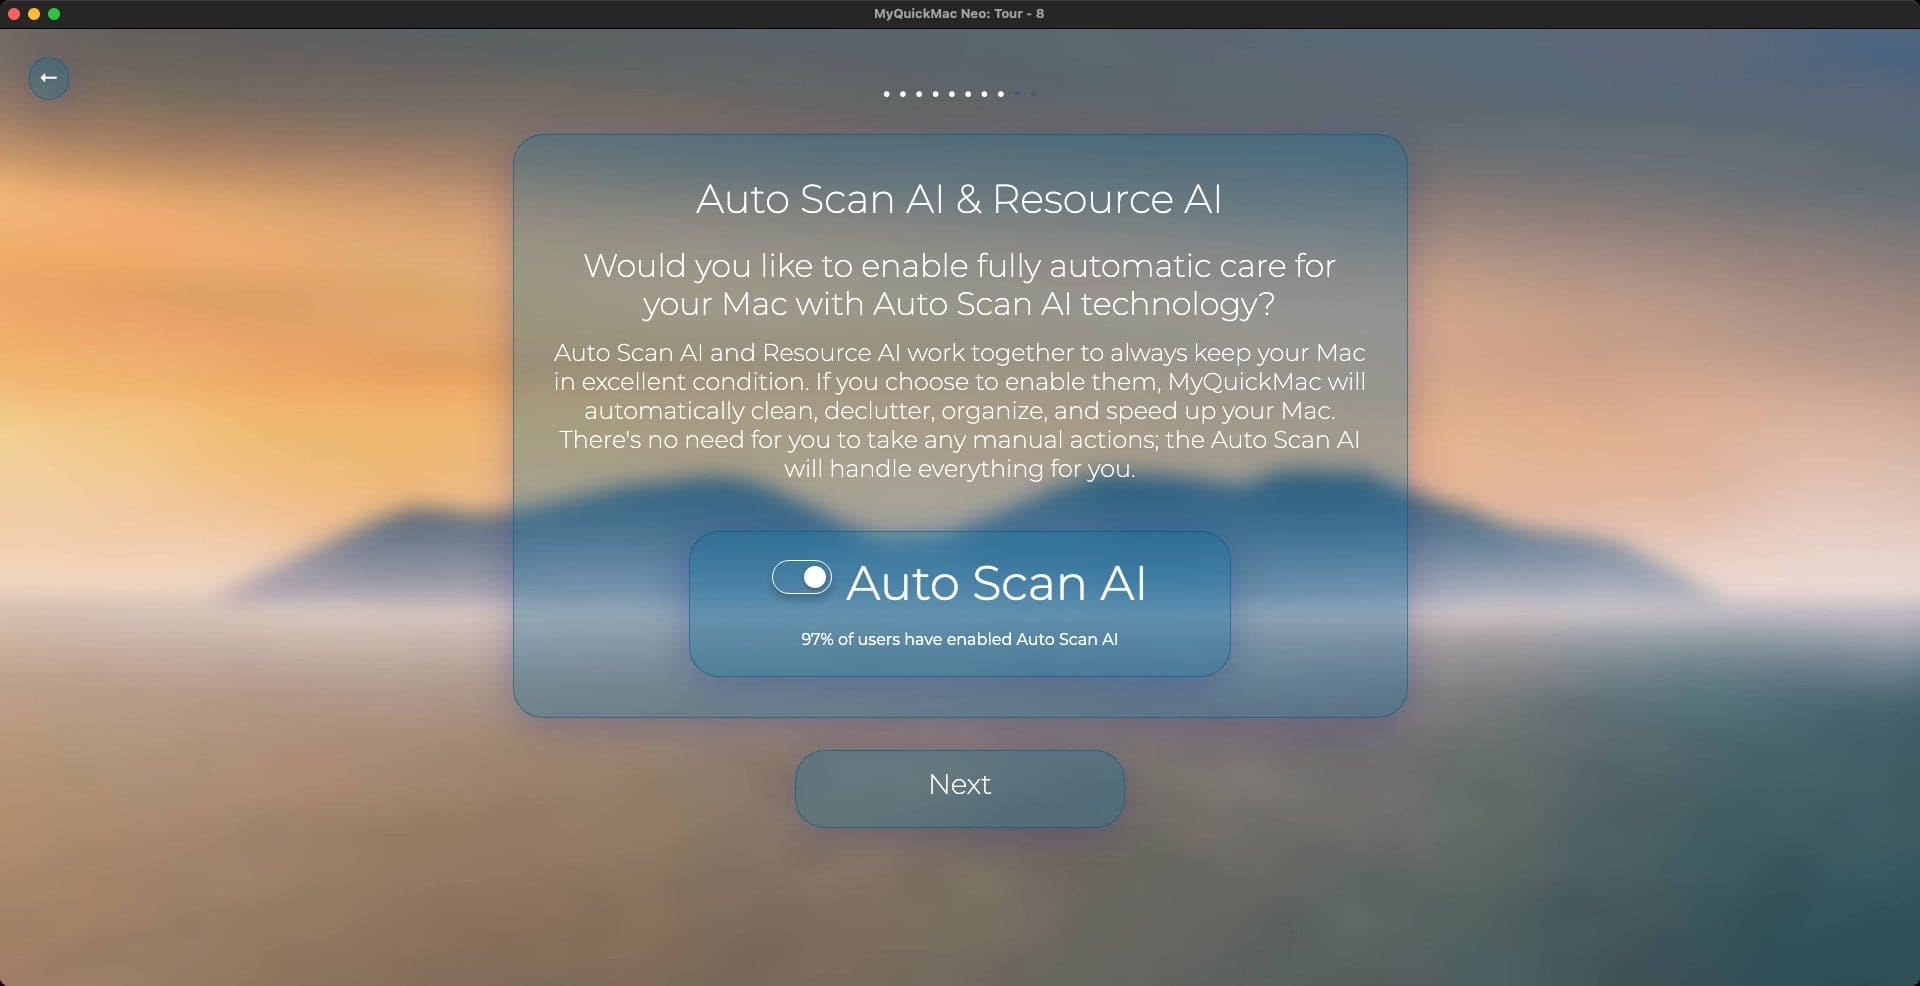 Enable or disable the Auto Scan AI. Your changes will be saved automatically.